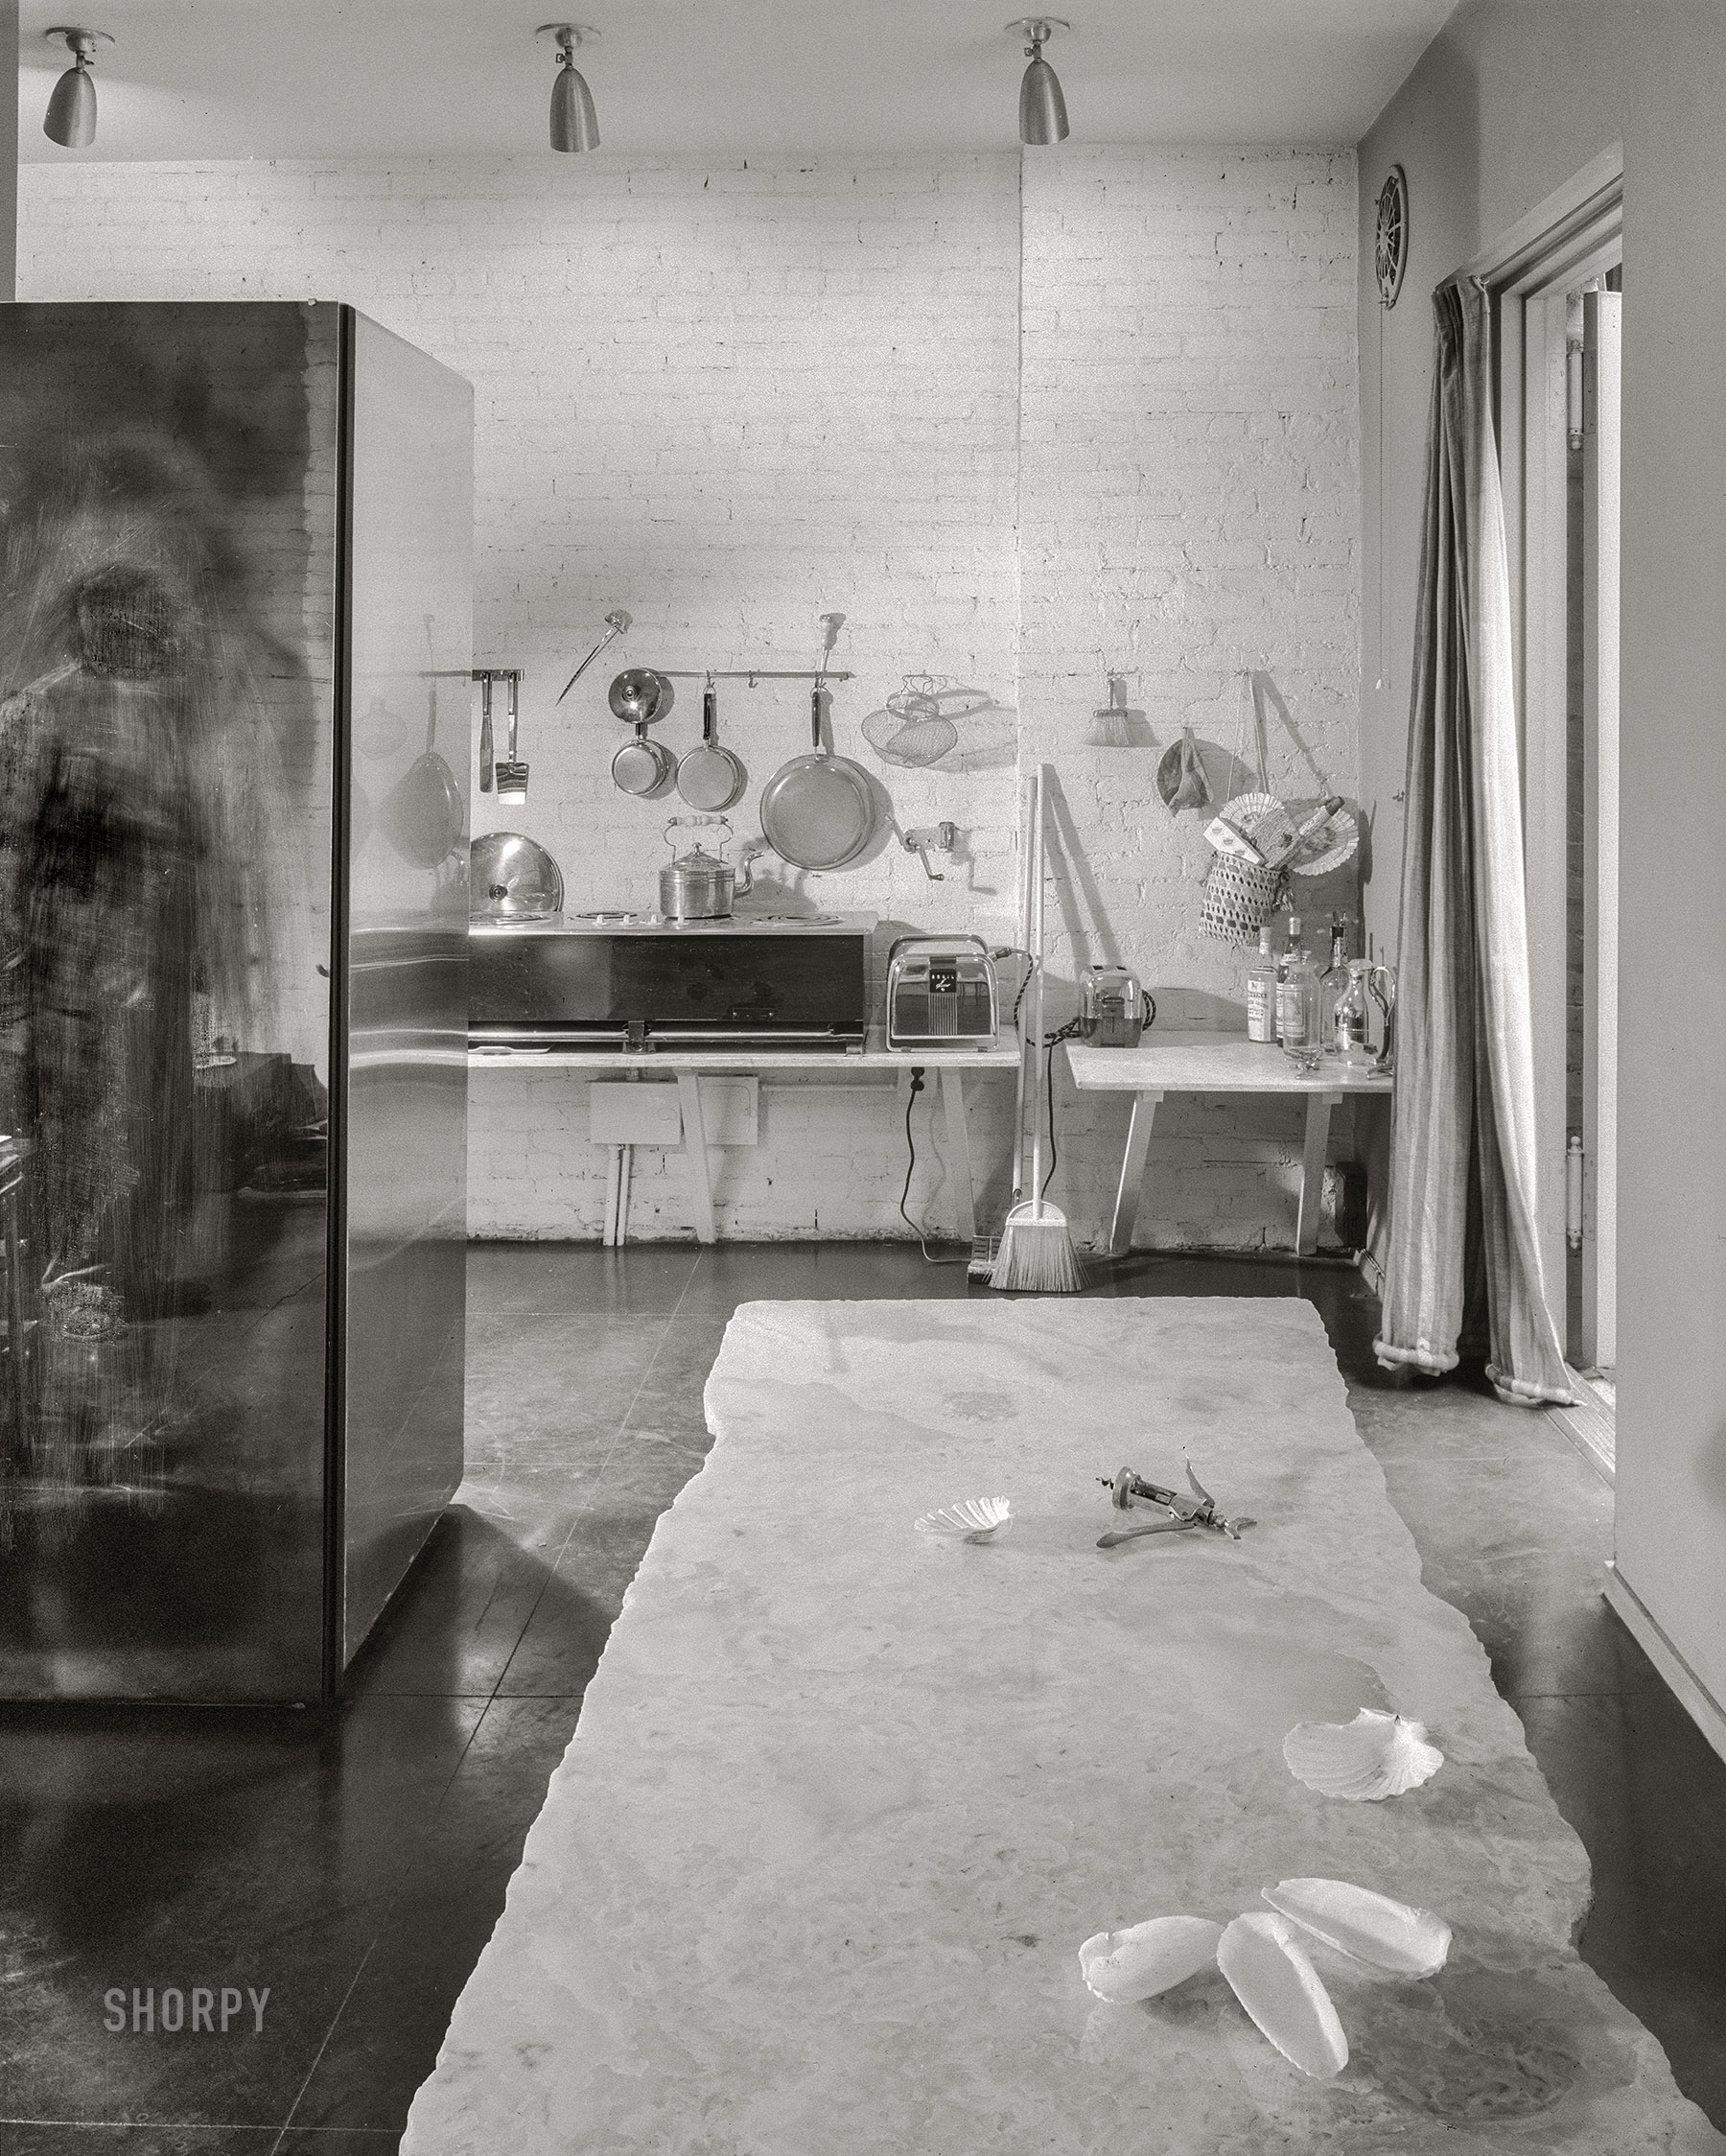 September 14, 1951. "Tillett residence at 170 E. 80th Street, New York City. Dining table." The minimalist townhouse kitchen of textile designers D.D. and Leslie Tillett. 4x5 inch acetate negative by Gottscho-Schleisner. View full size.